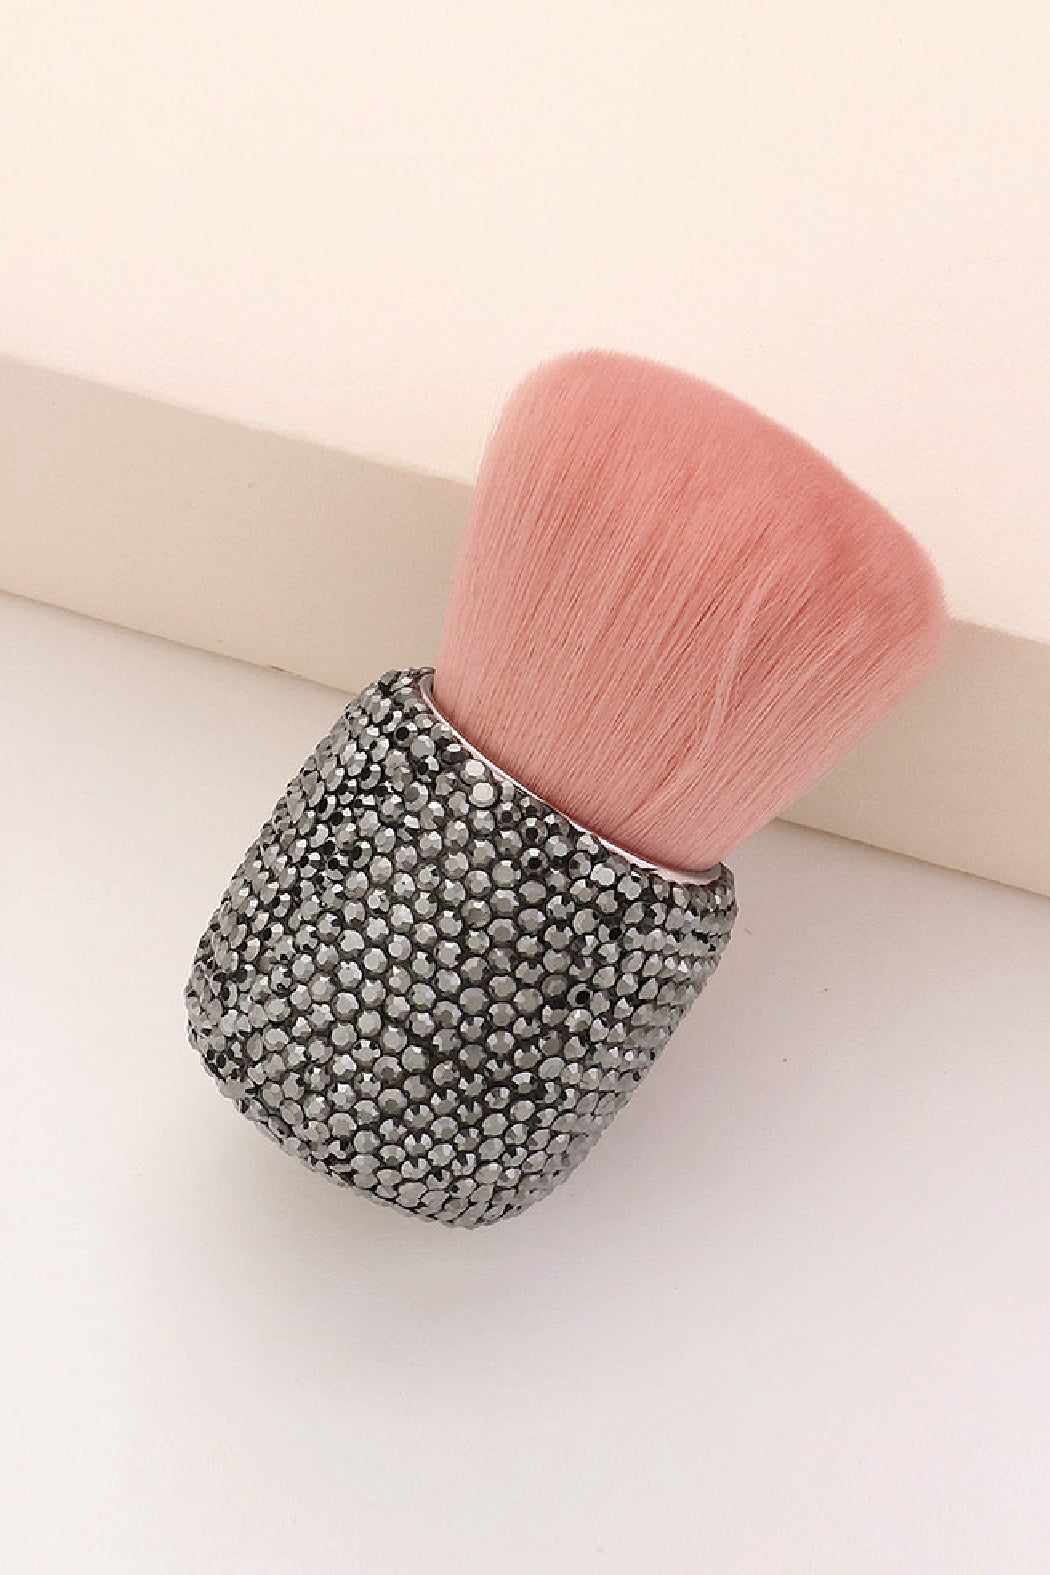 Crystal Make Up Brush by Embellish Your Life